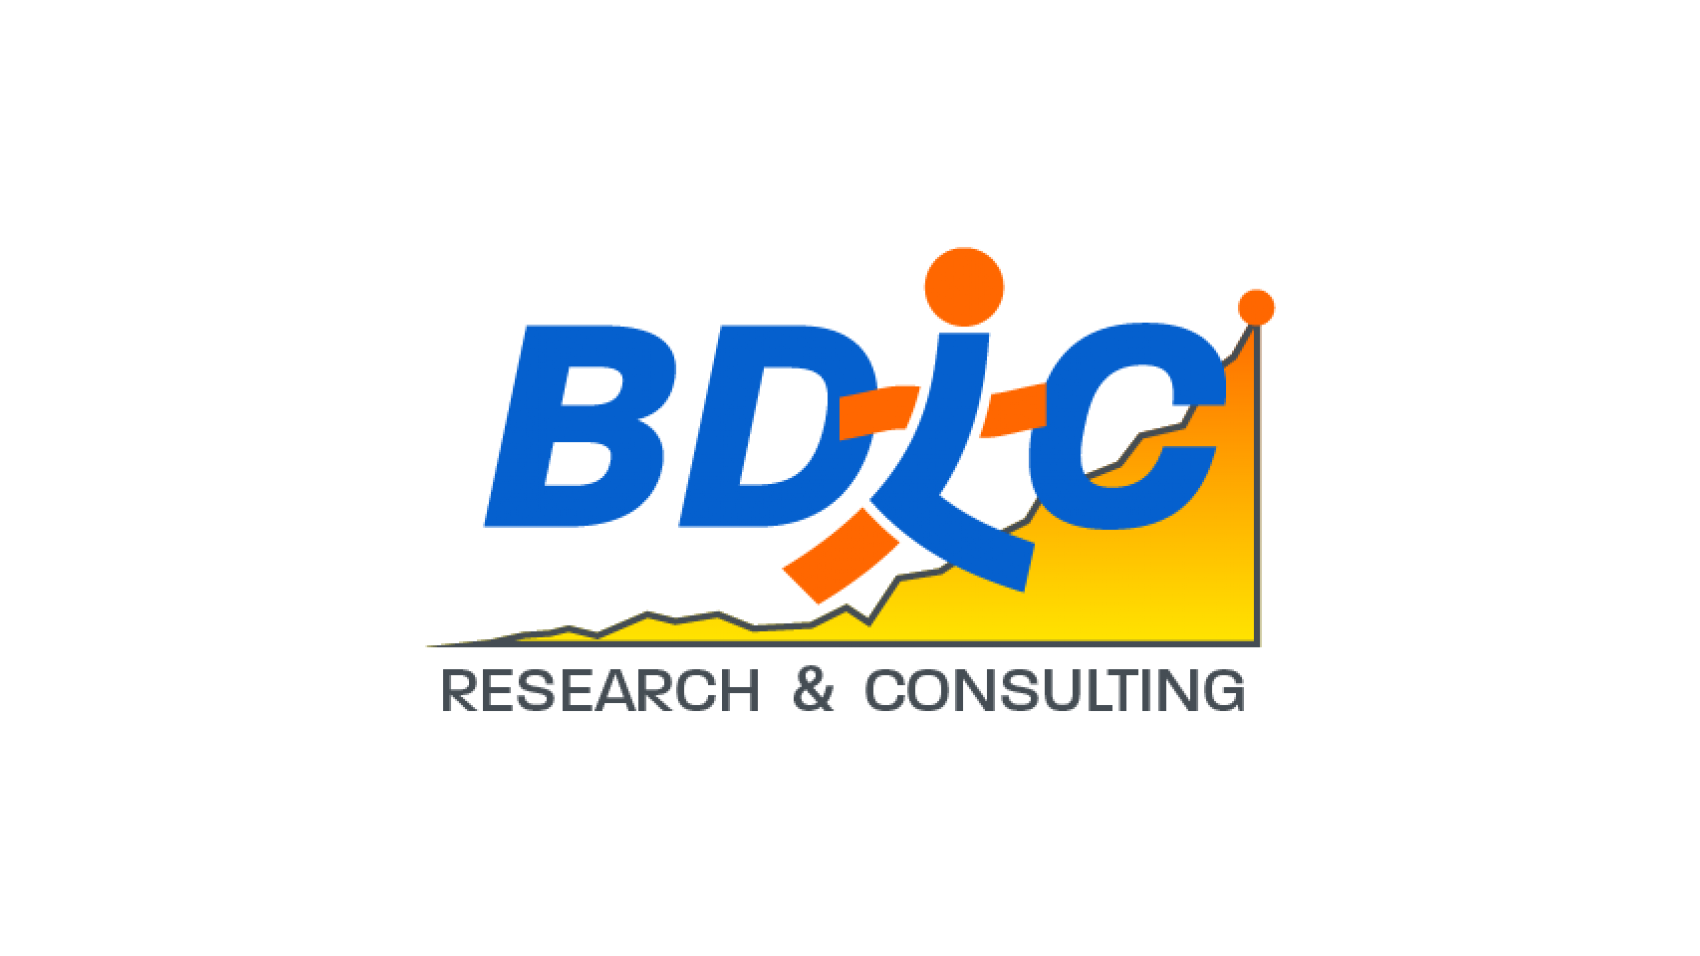 BDLC Research & Consulting Logo